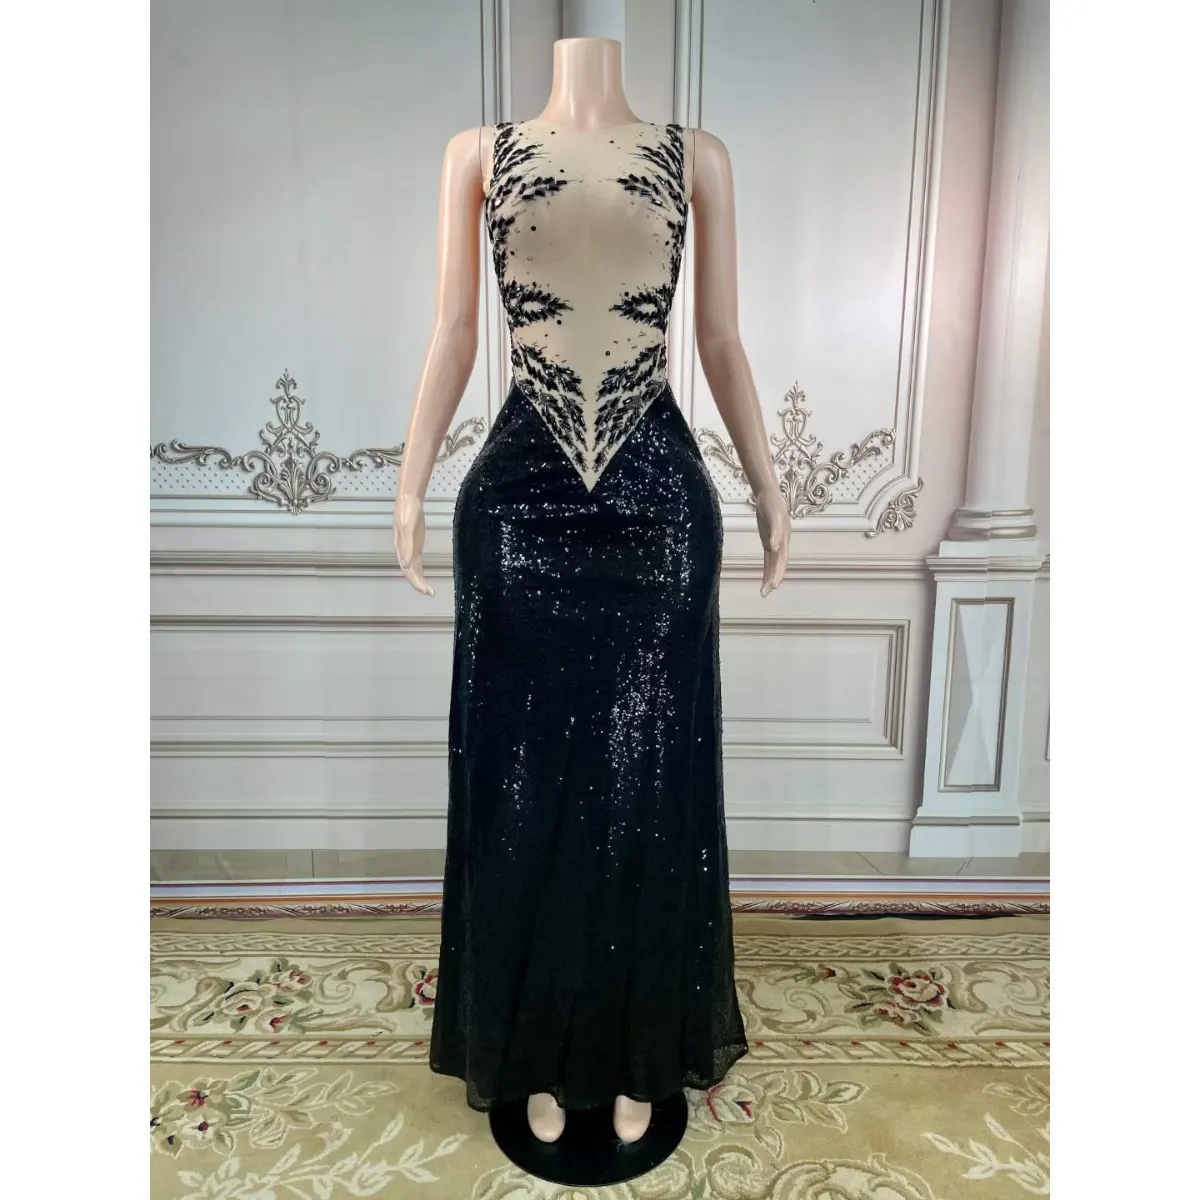 Vintage Sleeveless Sparkly Crystal Black Chiffon Mesh Dresses Prom Dresses Party Maxi Sequin Evening Gown Dress Long Elegant